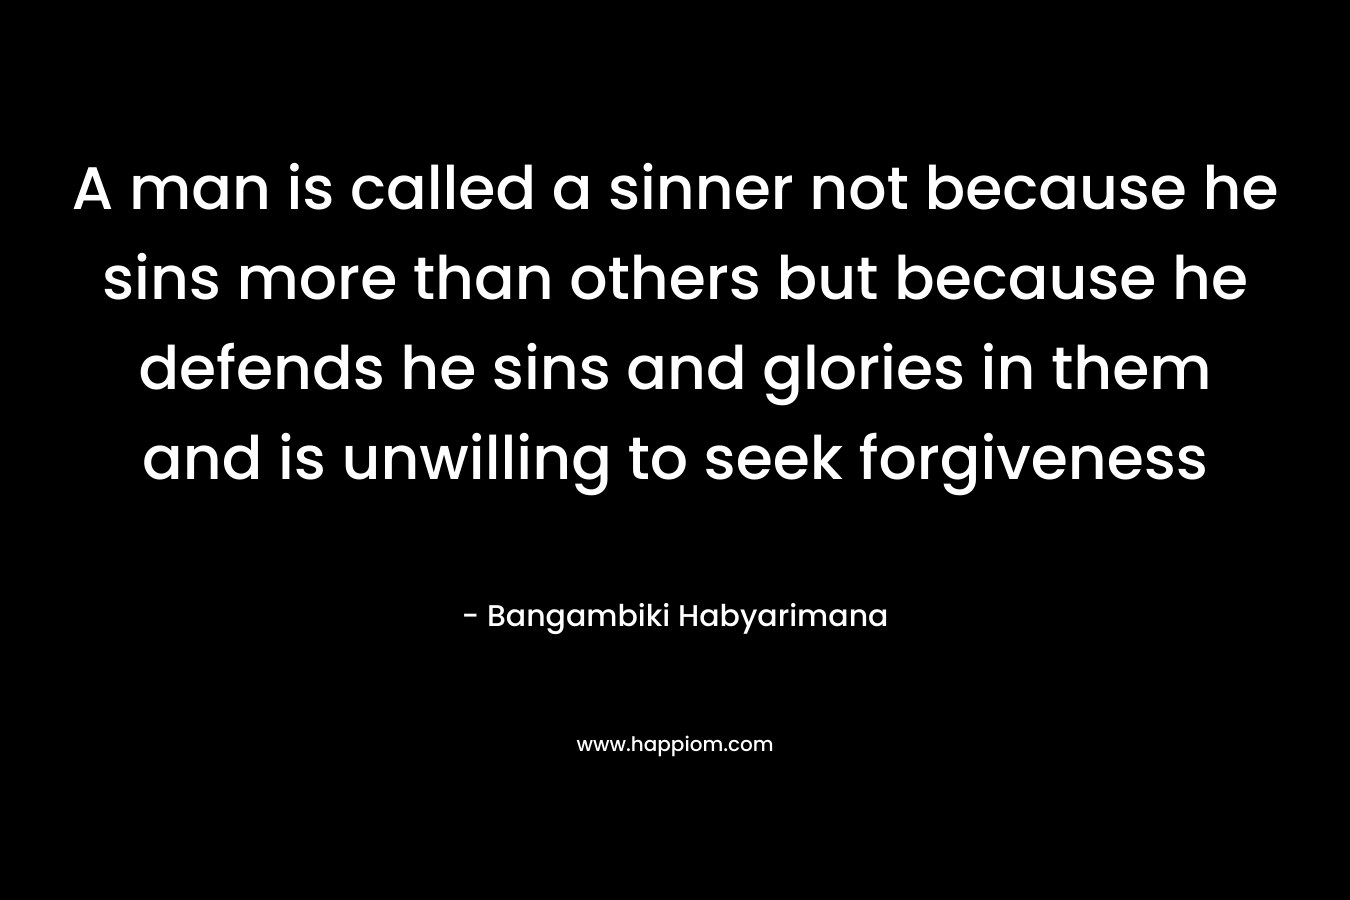 A man is called a sinner not because he sins more than others but because he defends he sins and glories in them and is unwilling to seek forgiveness – Bangambiki Habyarimana